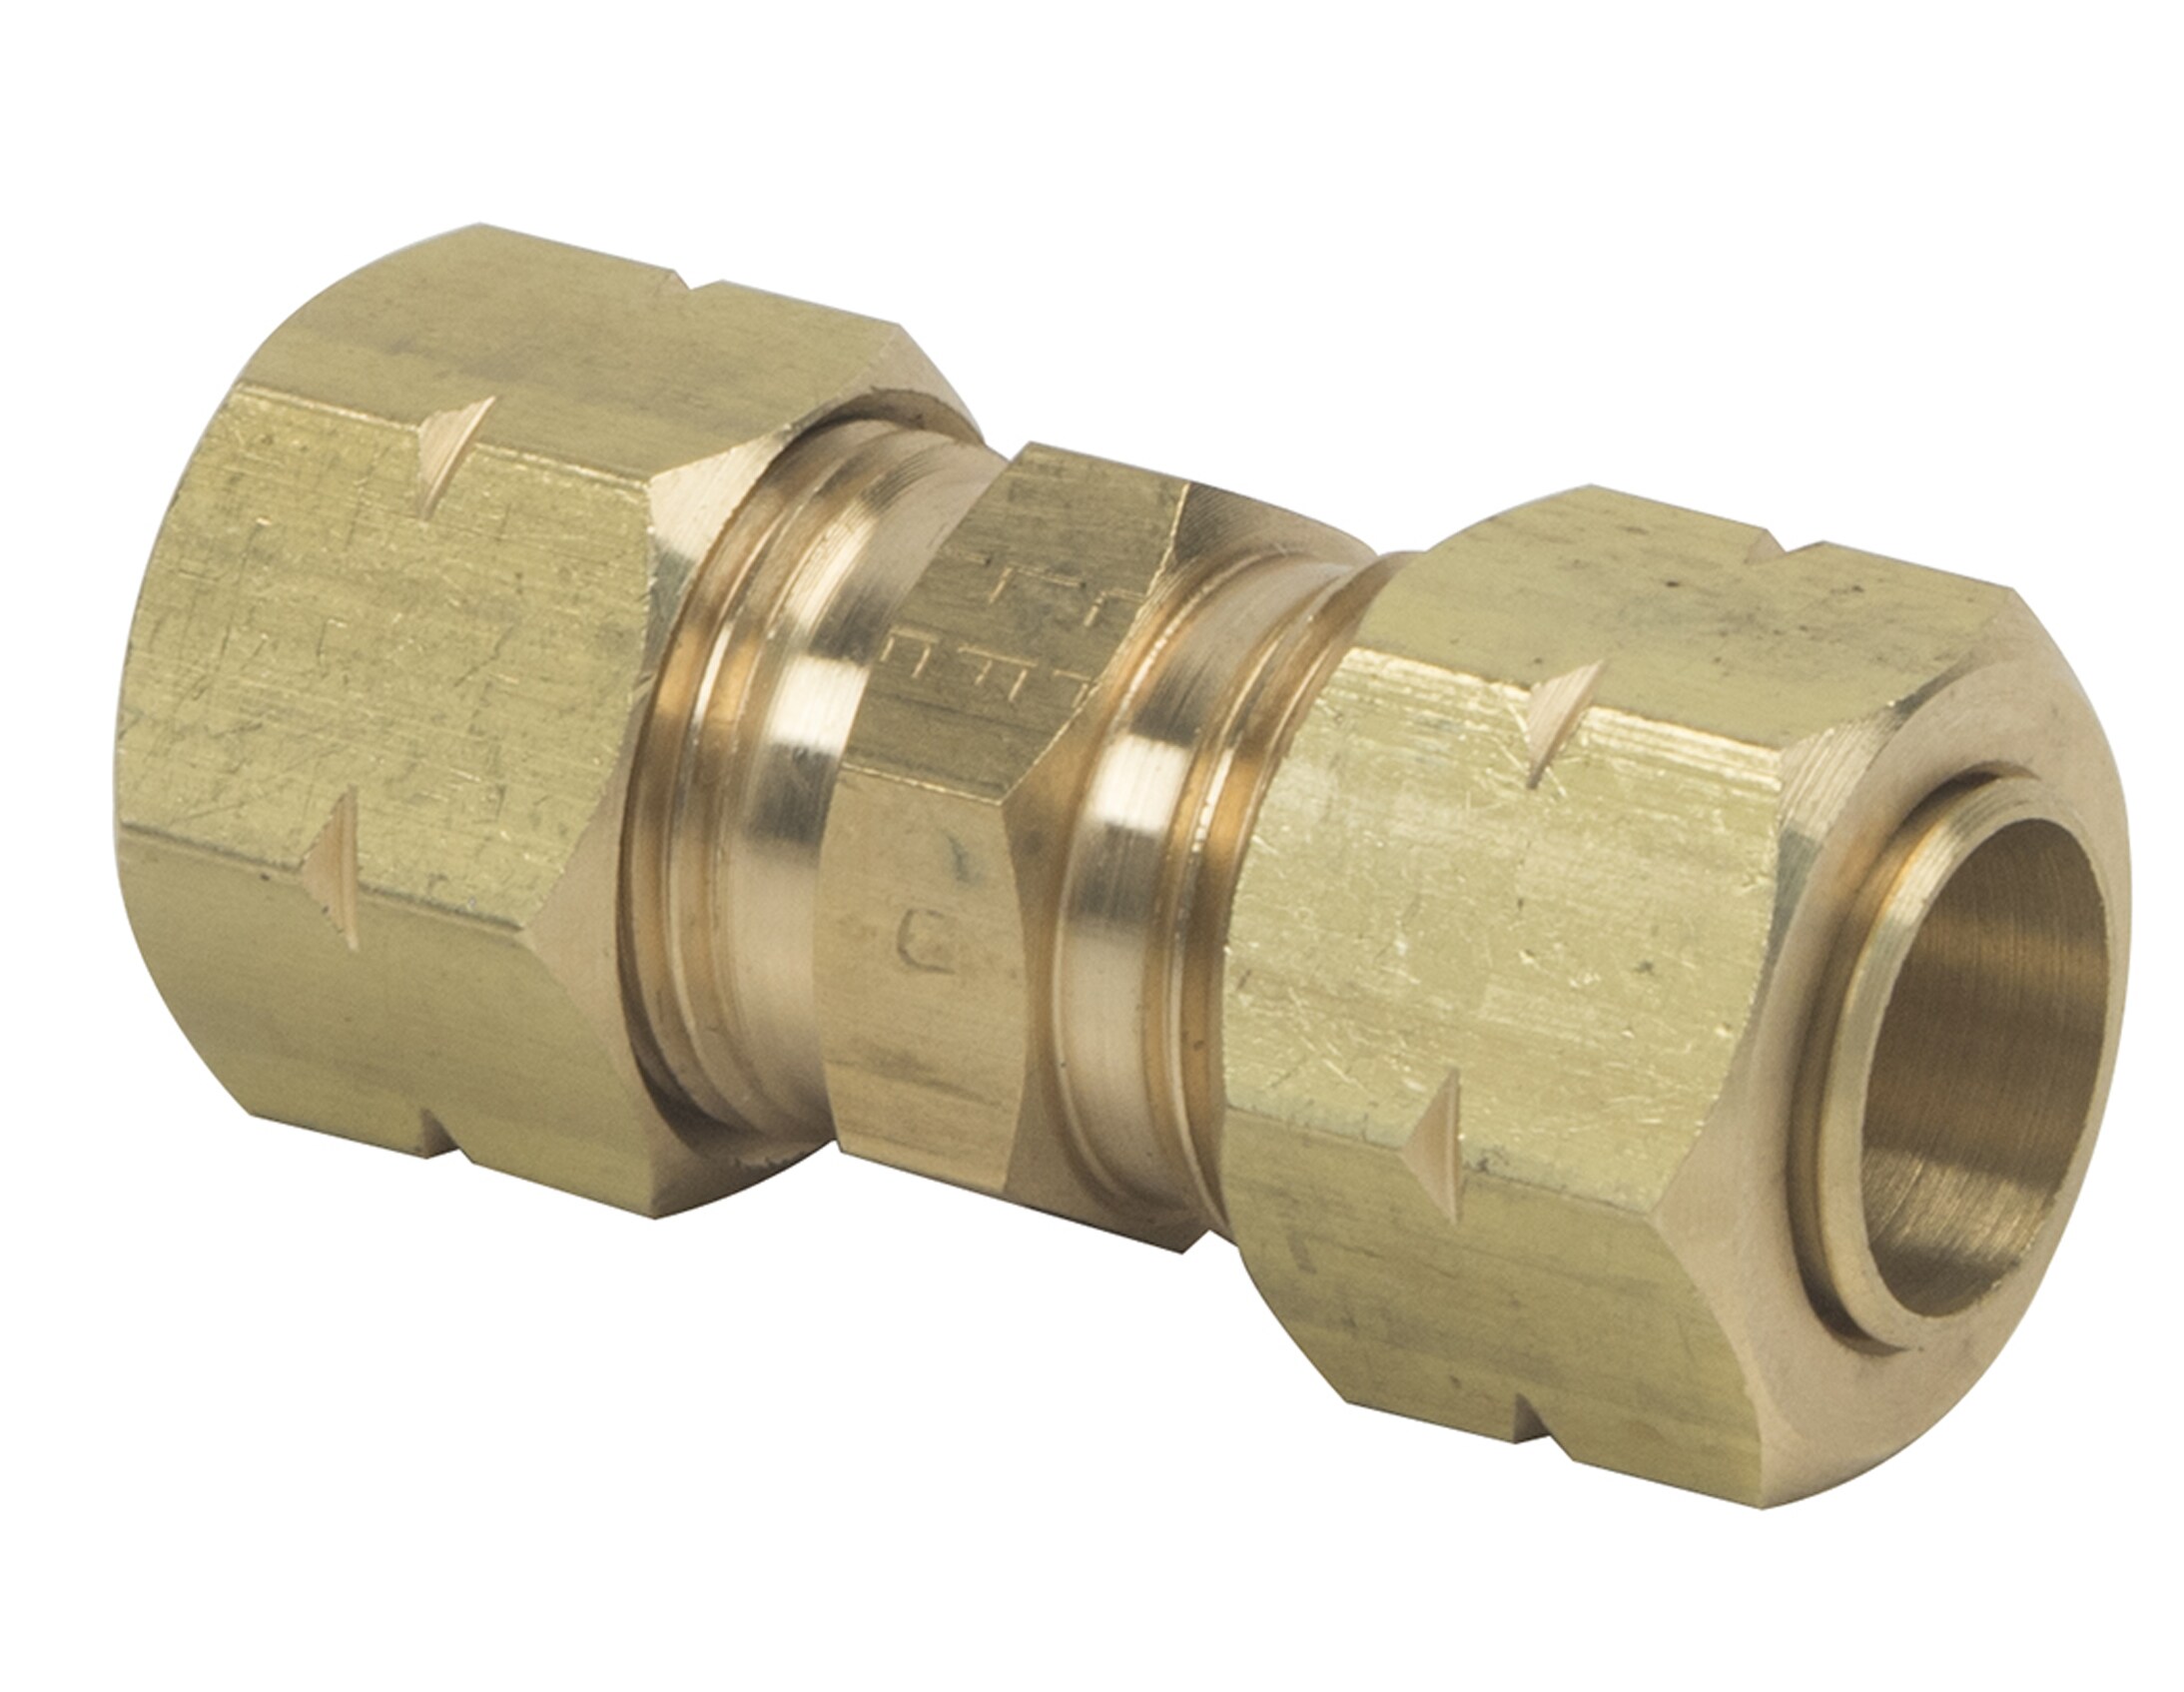 Lead Free Brass Union Coupling 3/8 COMP x 3/8 COMP Leak Proof Easy  Connect Union (5 Pack) 